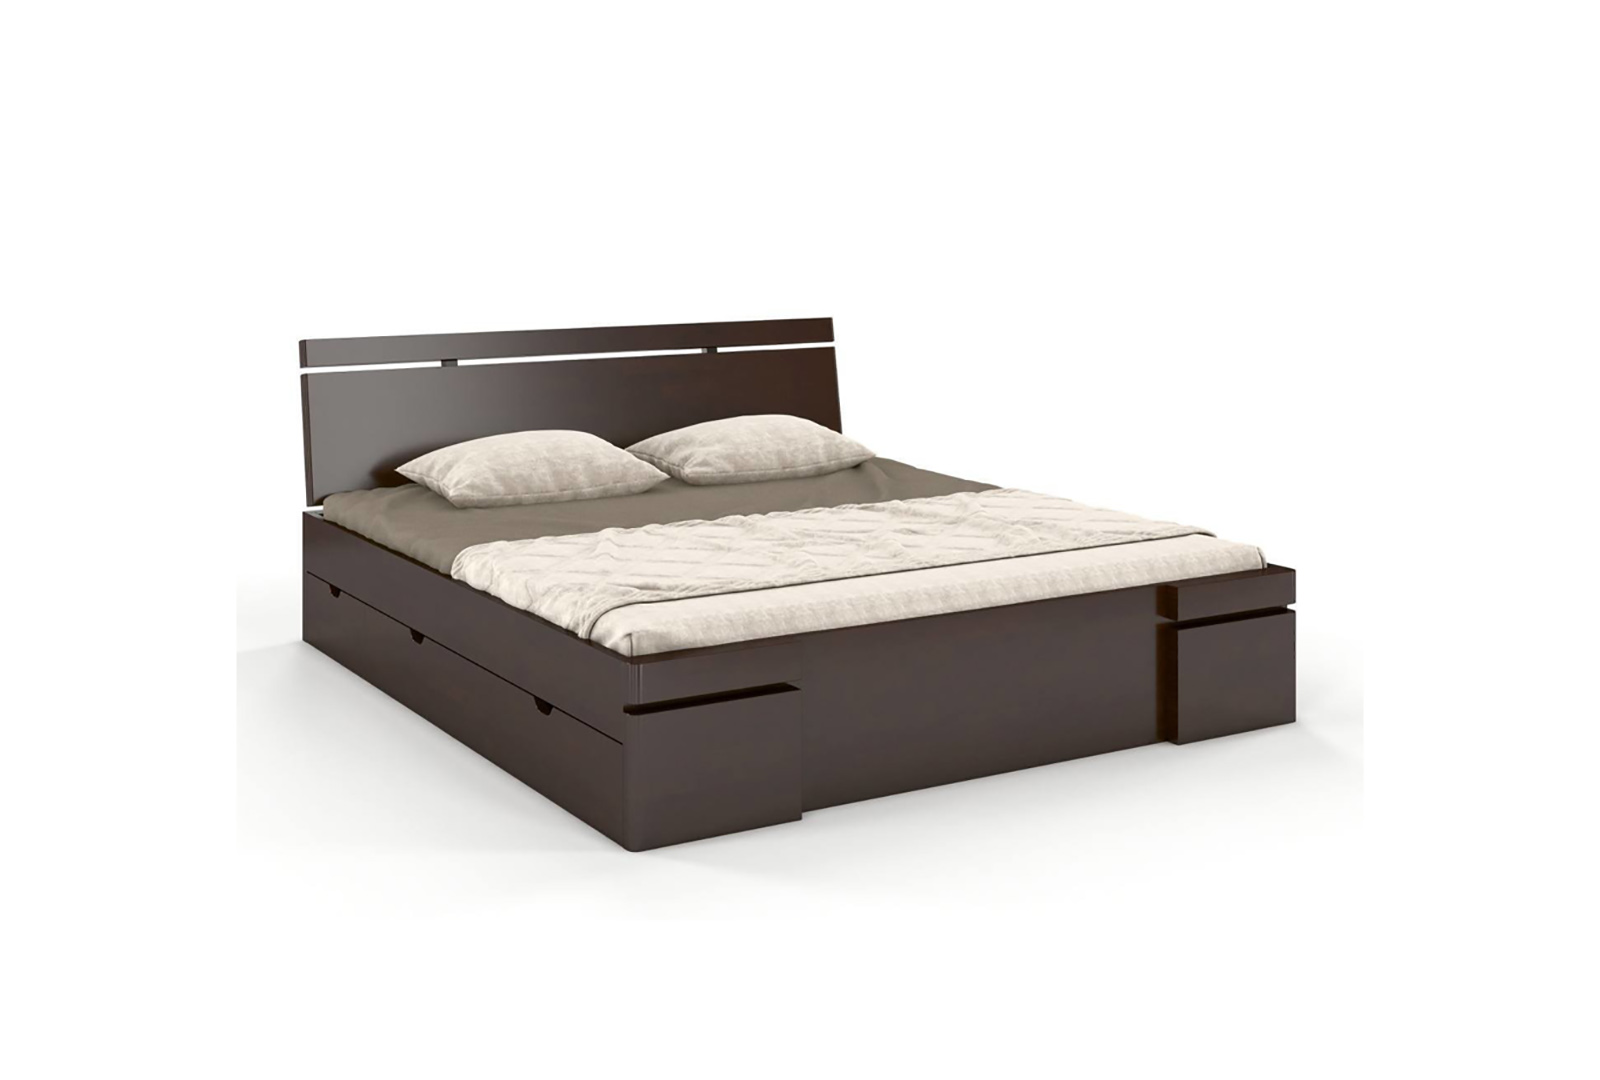 WOODEN BEECH BED WITH DRAWERS SKANDICA SPARTA MAXI AND DR 2